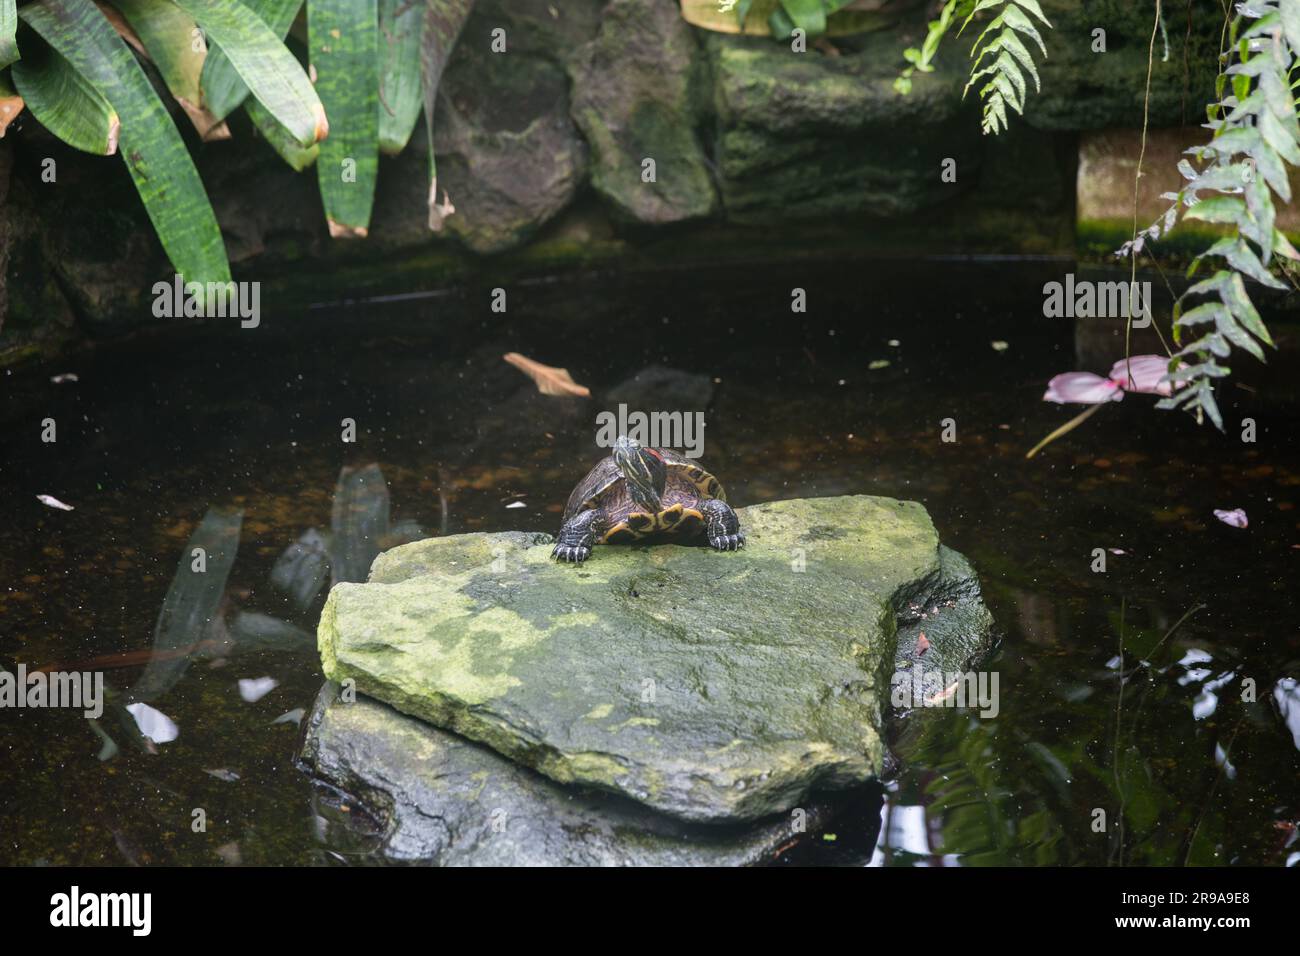 Red-eared slider turtle and koi fishes in a pond at a botanical garden in Southern California Stock Photo